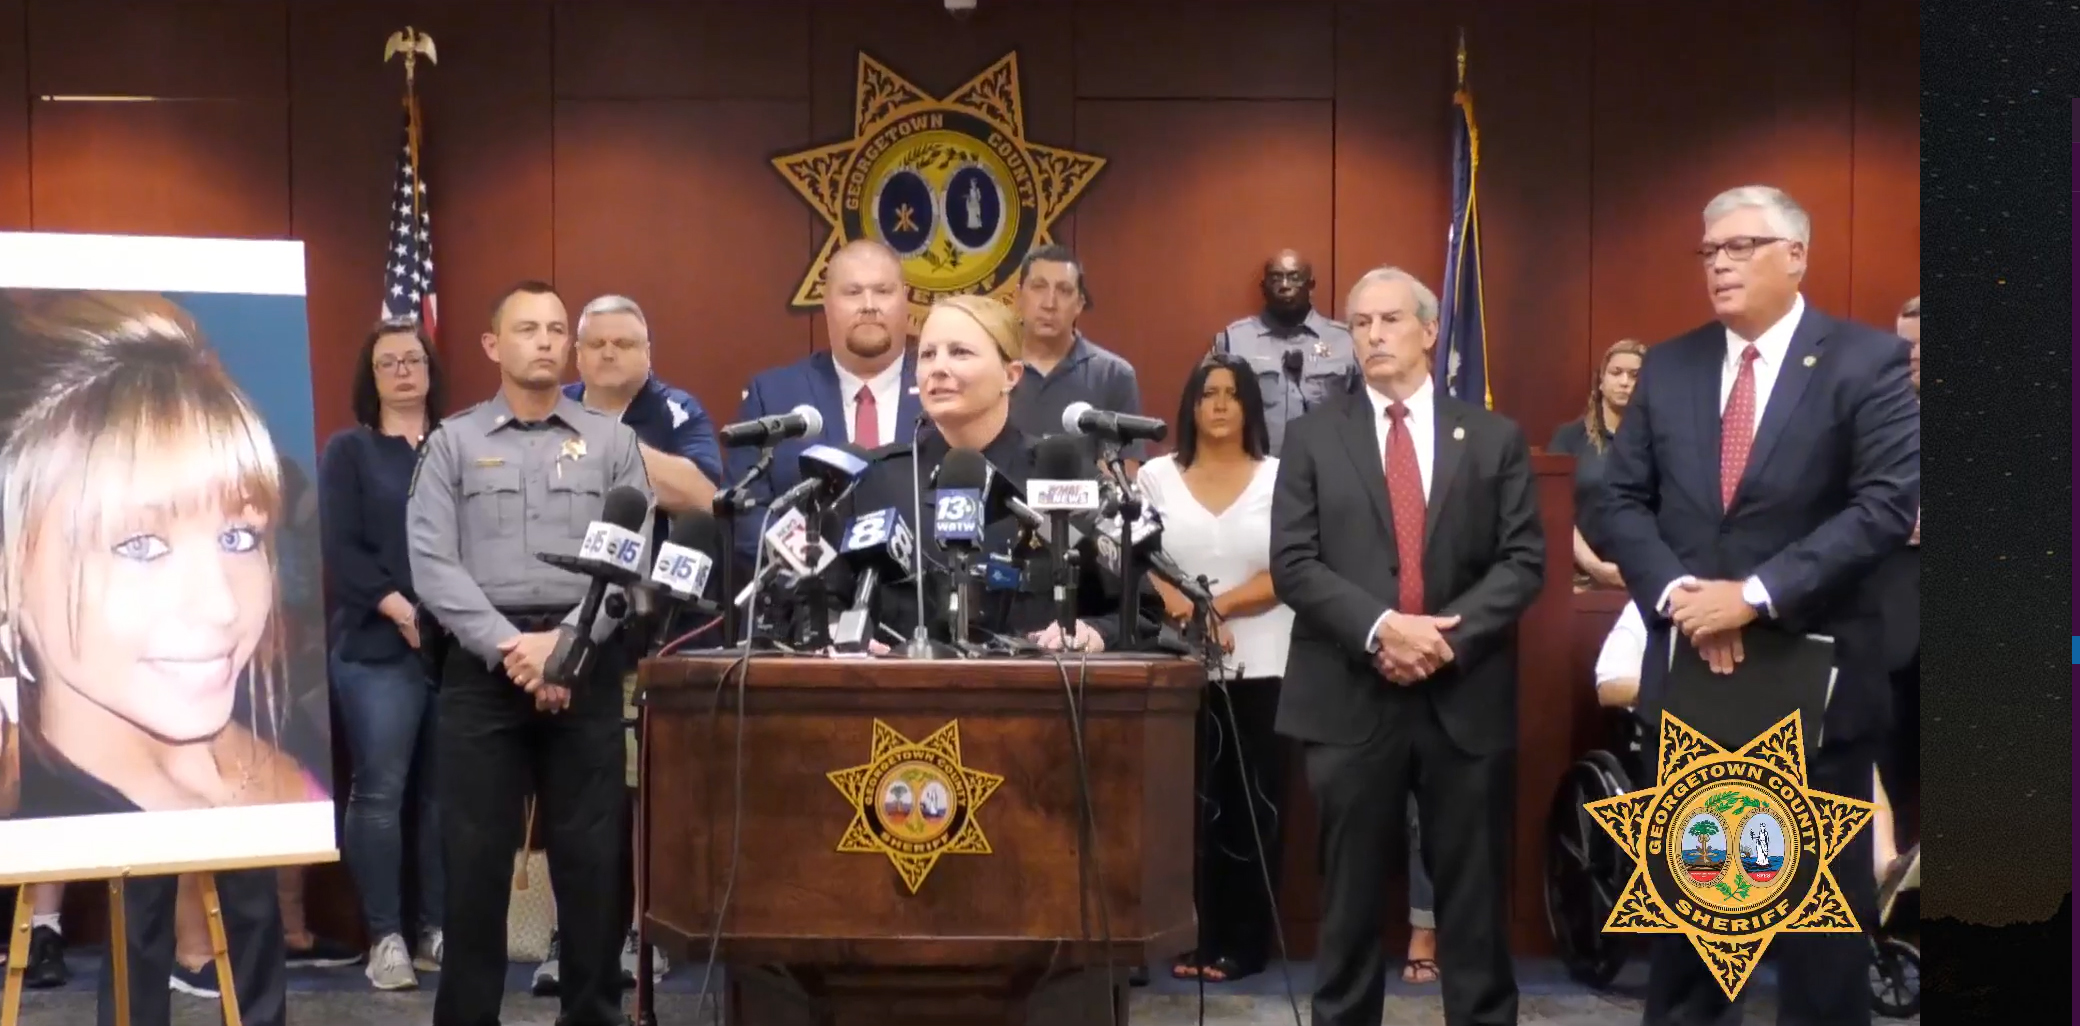 PHOTO: In this screen grab from a video, Myrtle Beach Police Chief Amy Prock speaks at a press conference about the remains of Brittanee Drexel being found and the arrest of Raymond Moody, on May 16, 2022, in Georgetown County, S.C.